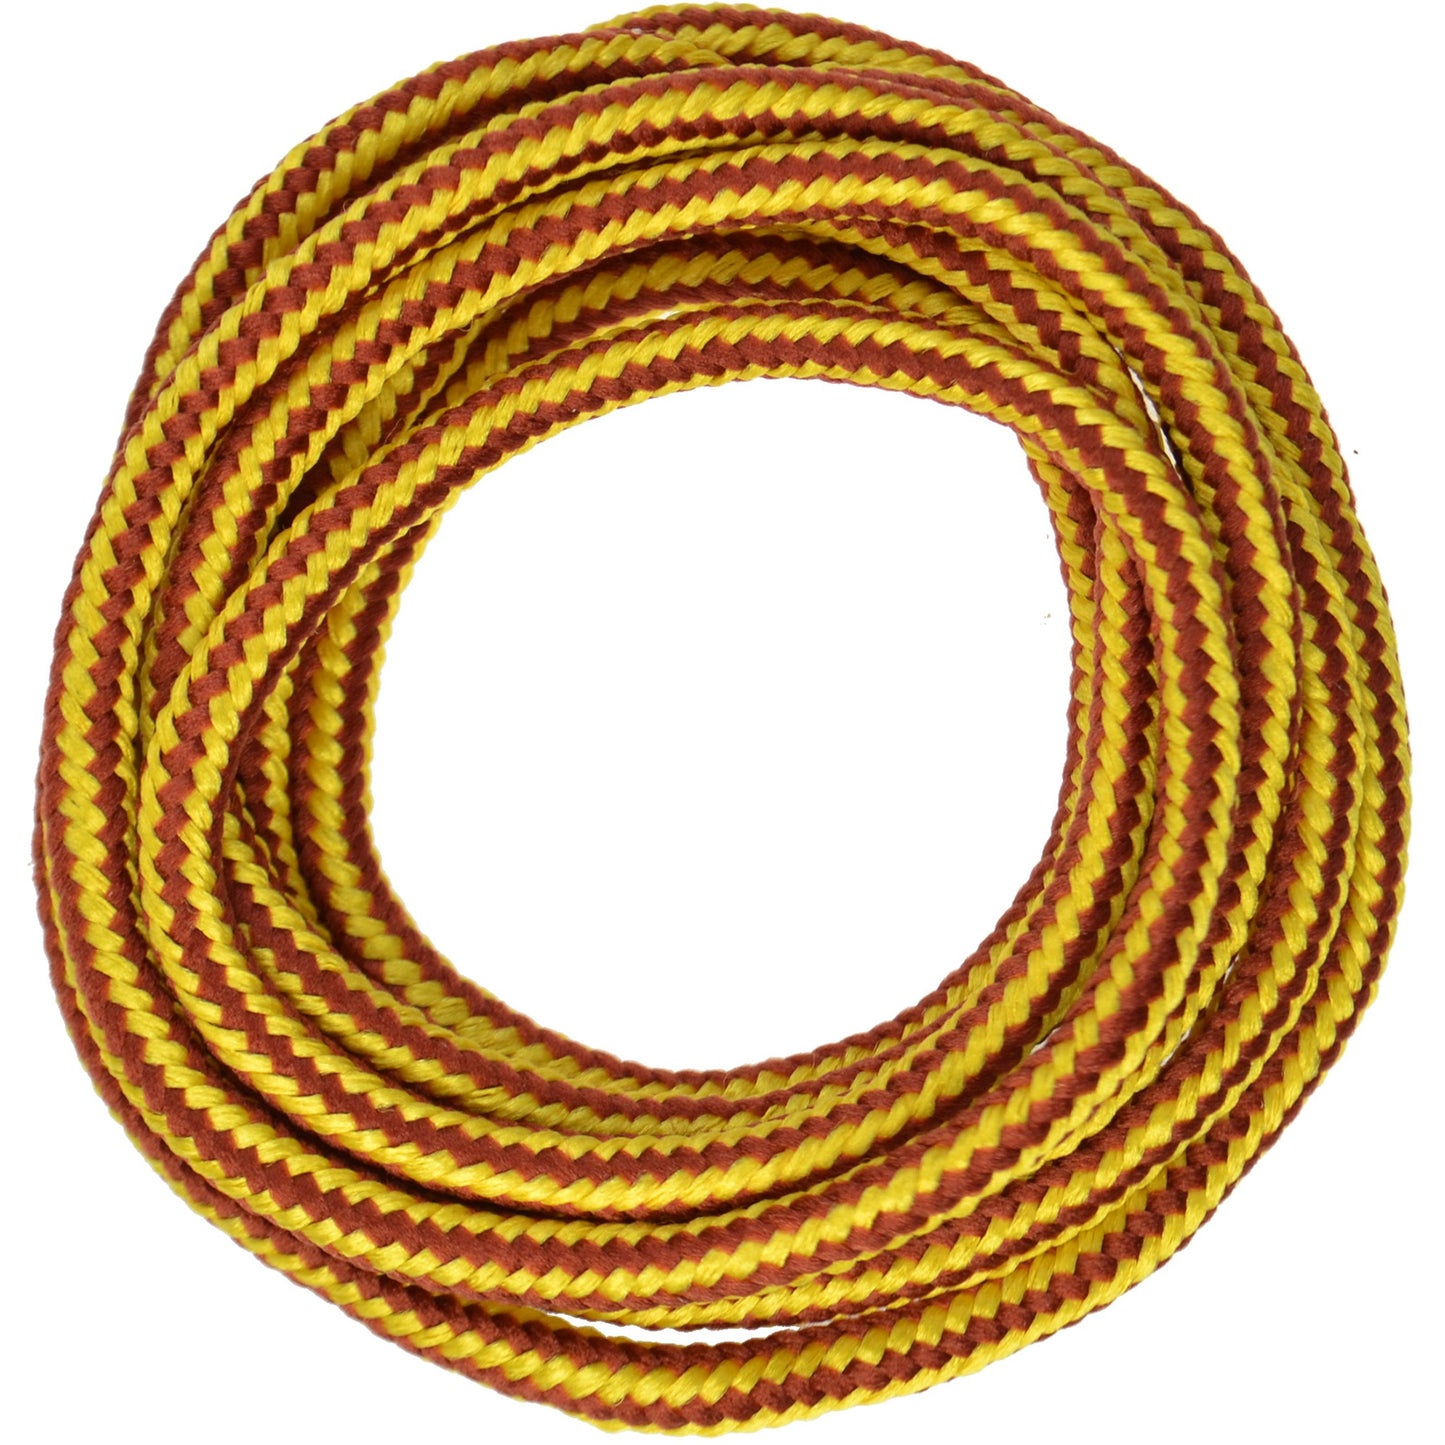 90cm Worksite Cord Work Boot Shoe Laces - Gold/Brown